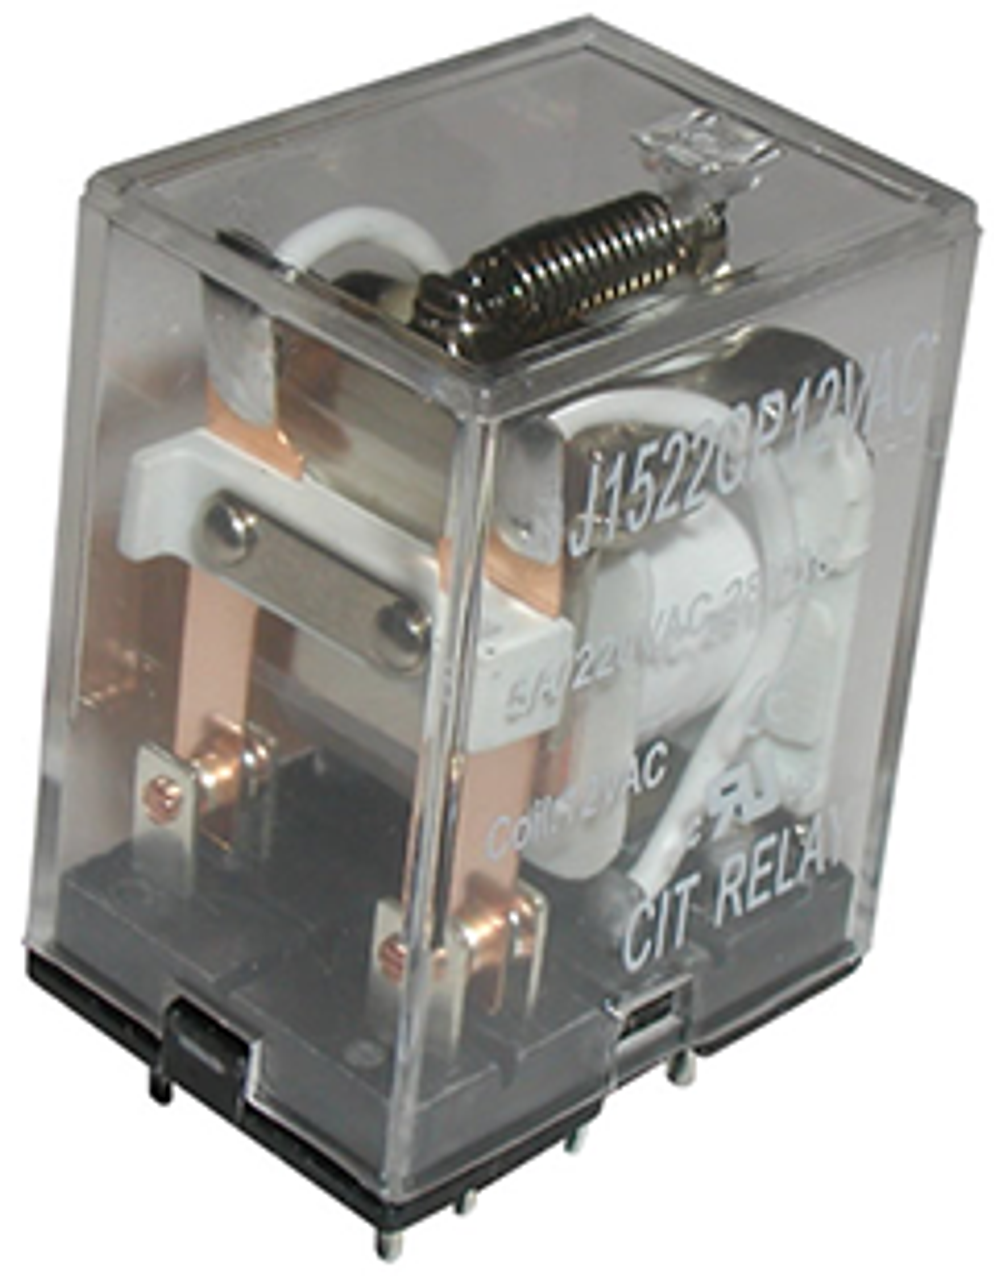 CIT Relay and Switch J1522CP12VDCD Industrial Relays